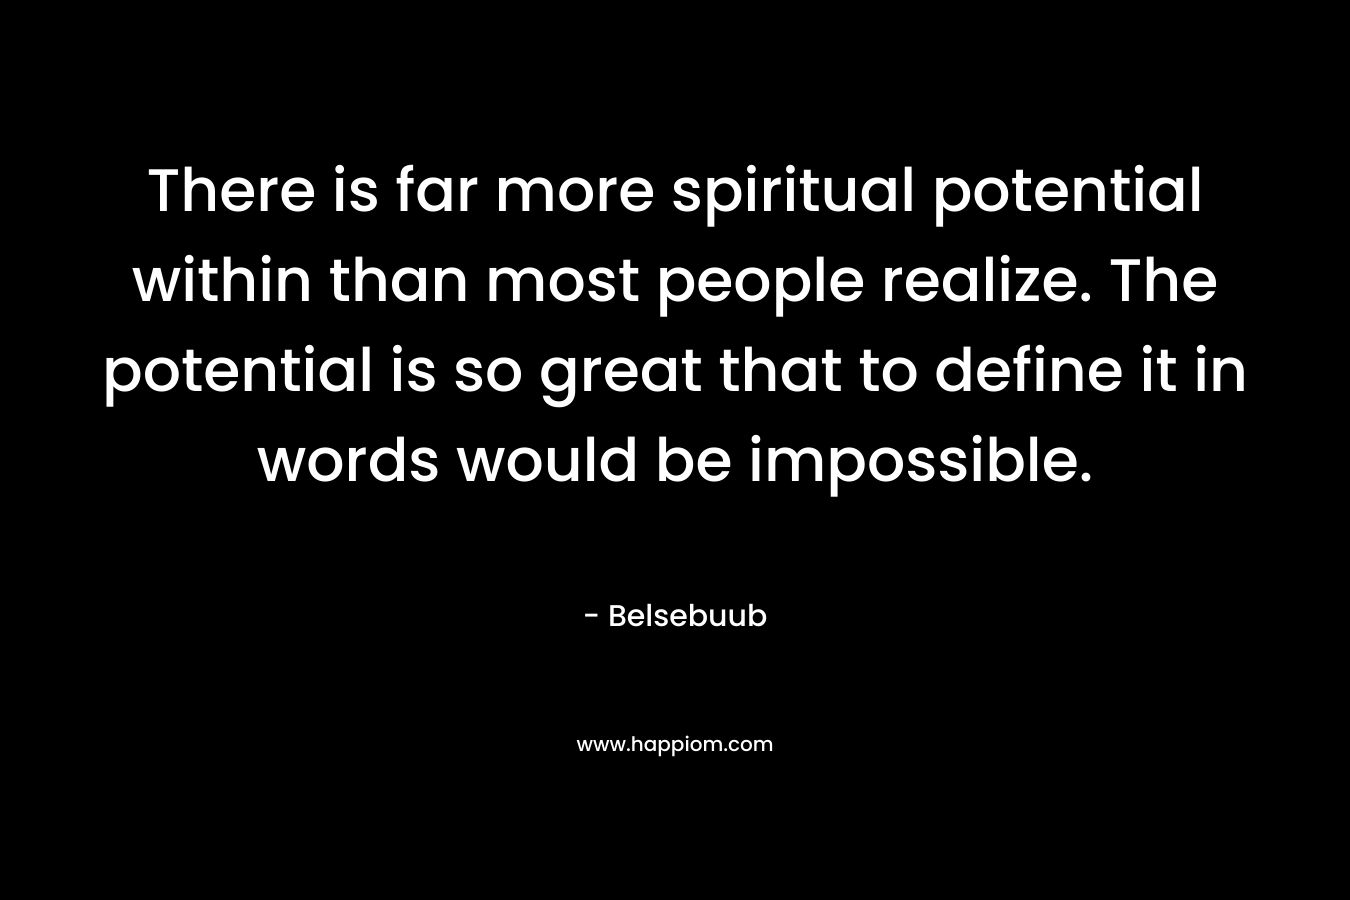 There is far more spiritual potential within than most people realize. The potential is so great that to define it in words would be impossible.